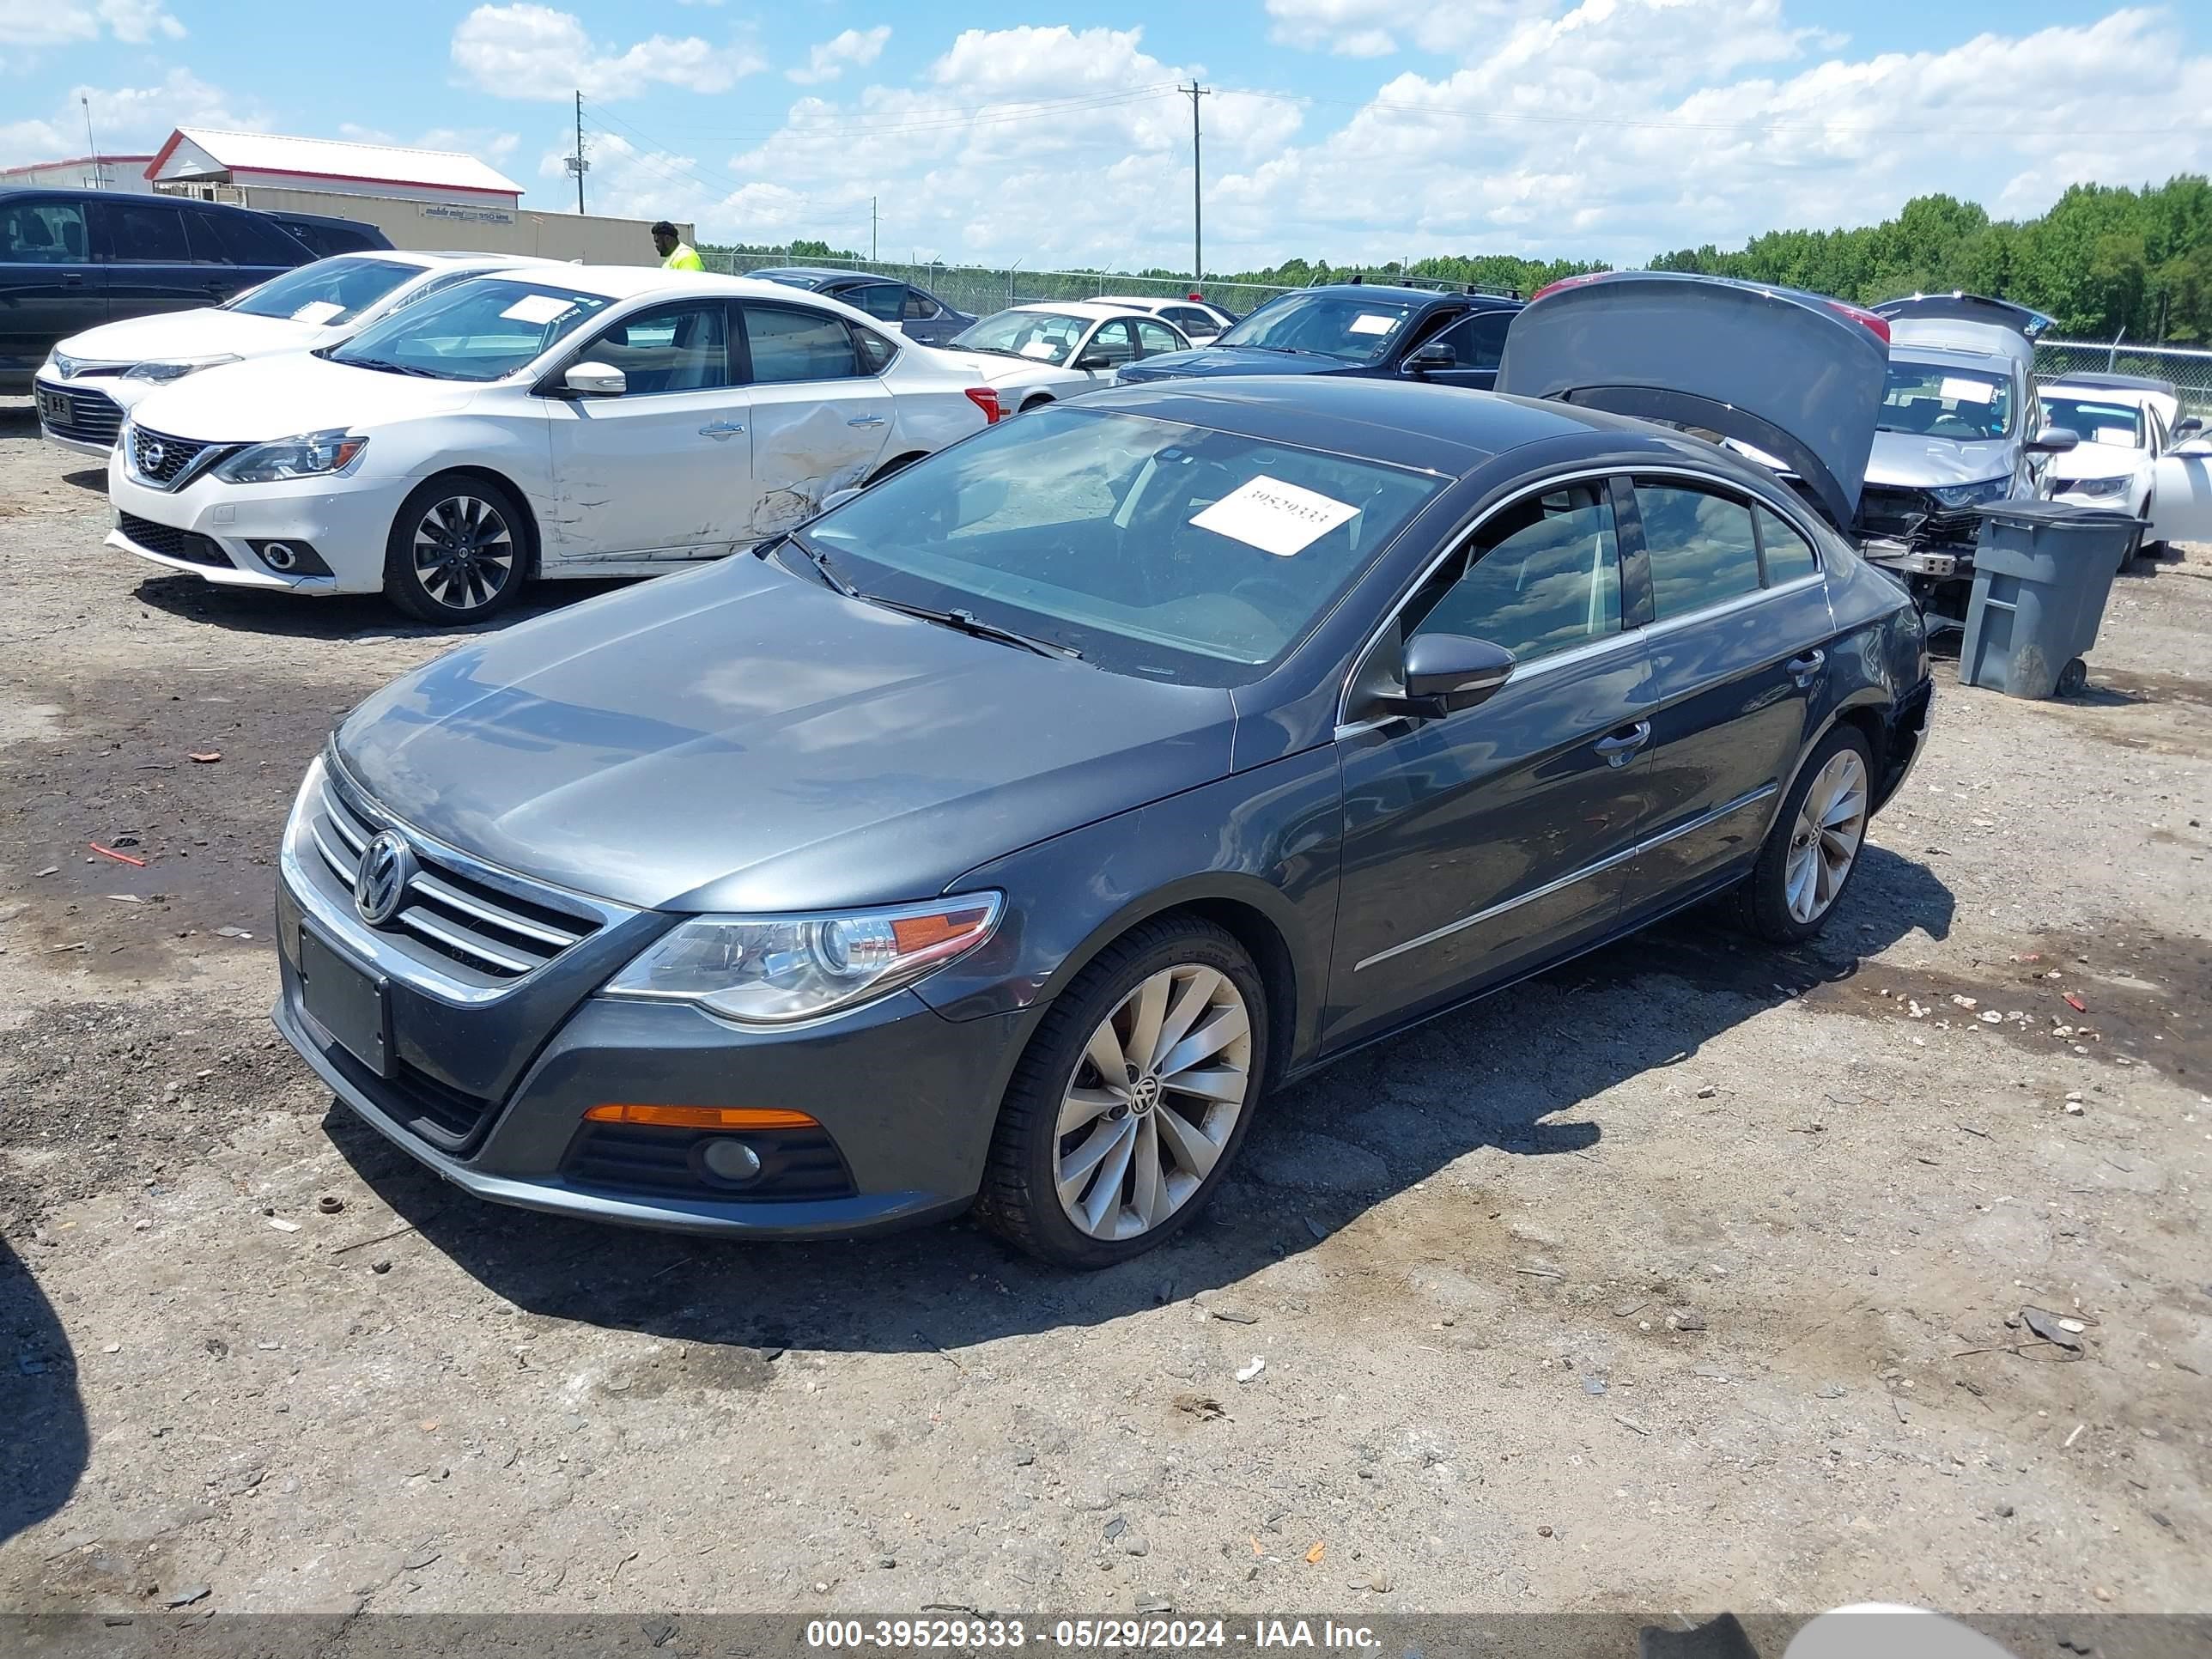 2012 Volkswagen Cc Lux Limited vin: WVWHP7AN4CE534143